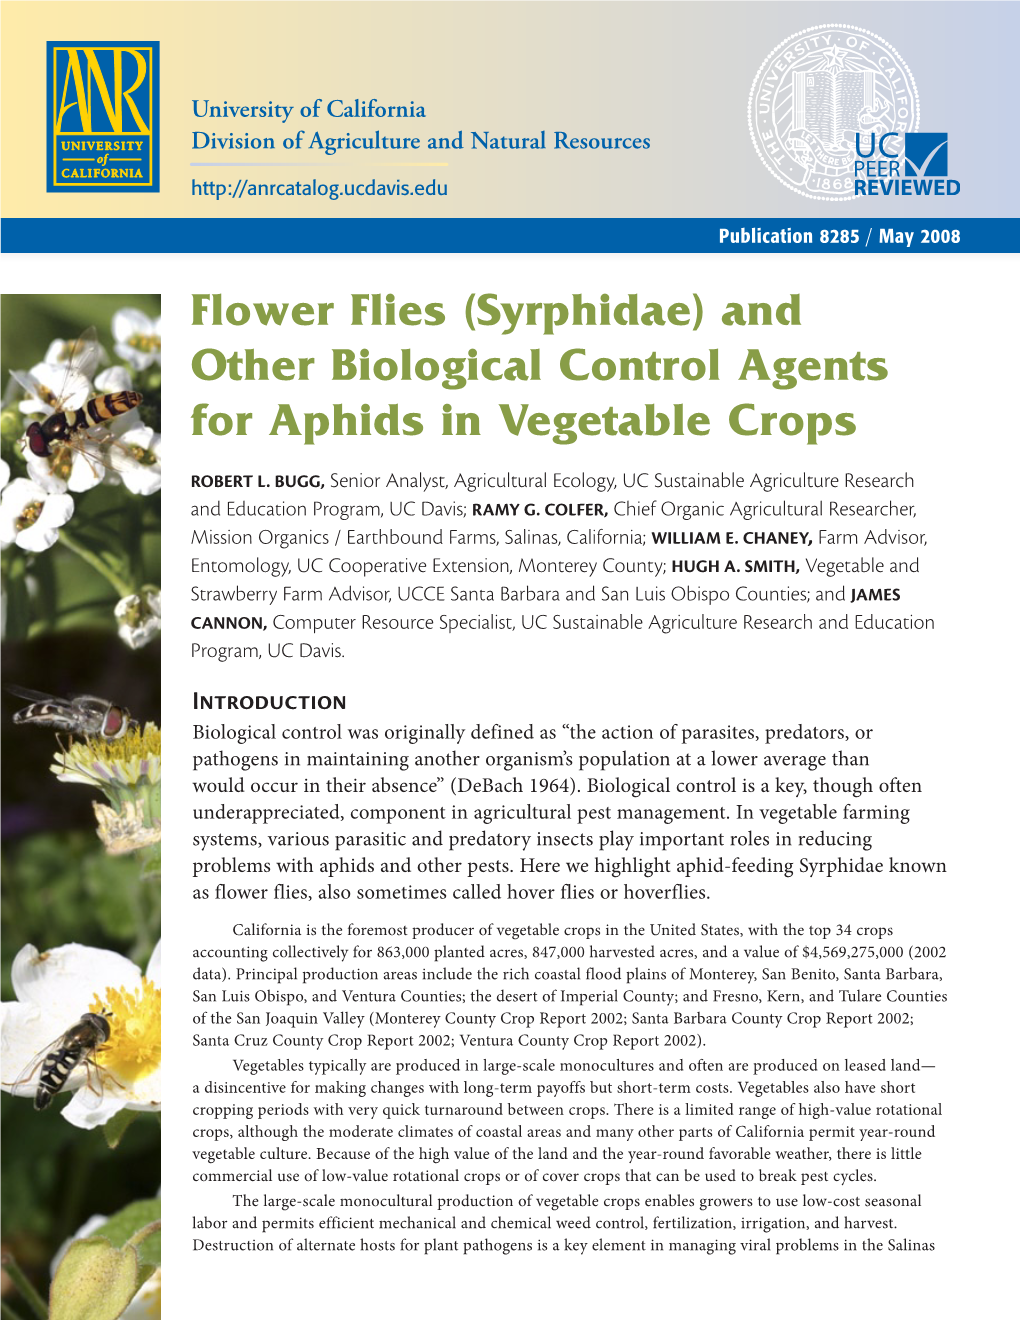 Flower Flies (Syrphidae) and Other Biological Control Agents for Aphids in Vegetable Crops